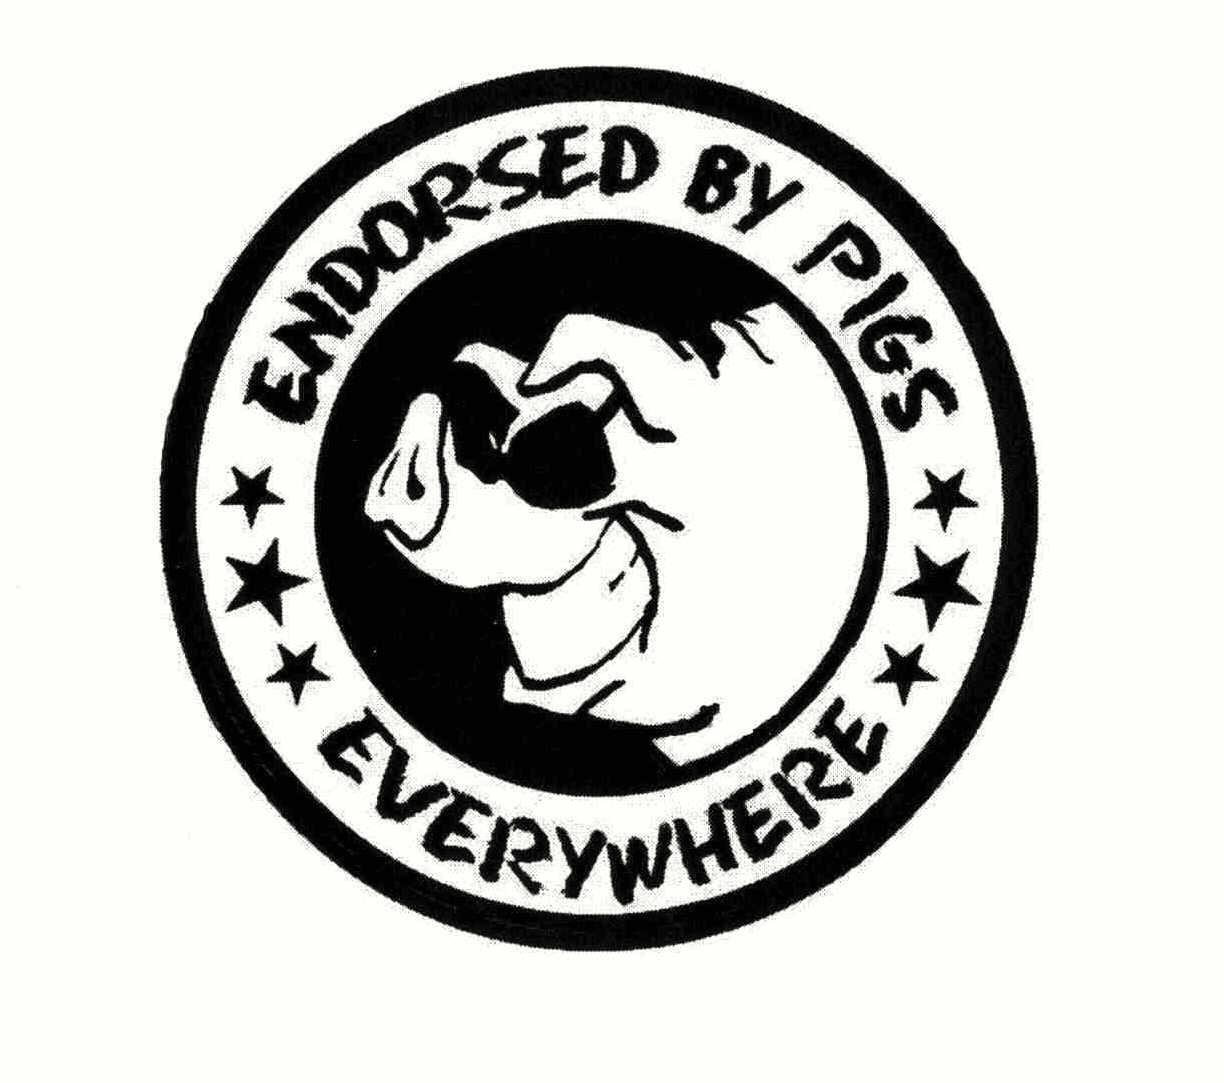  ENDORSED BY PIGS EVERYWHERE